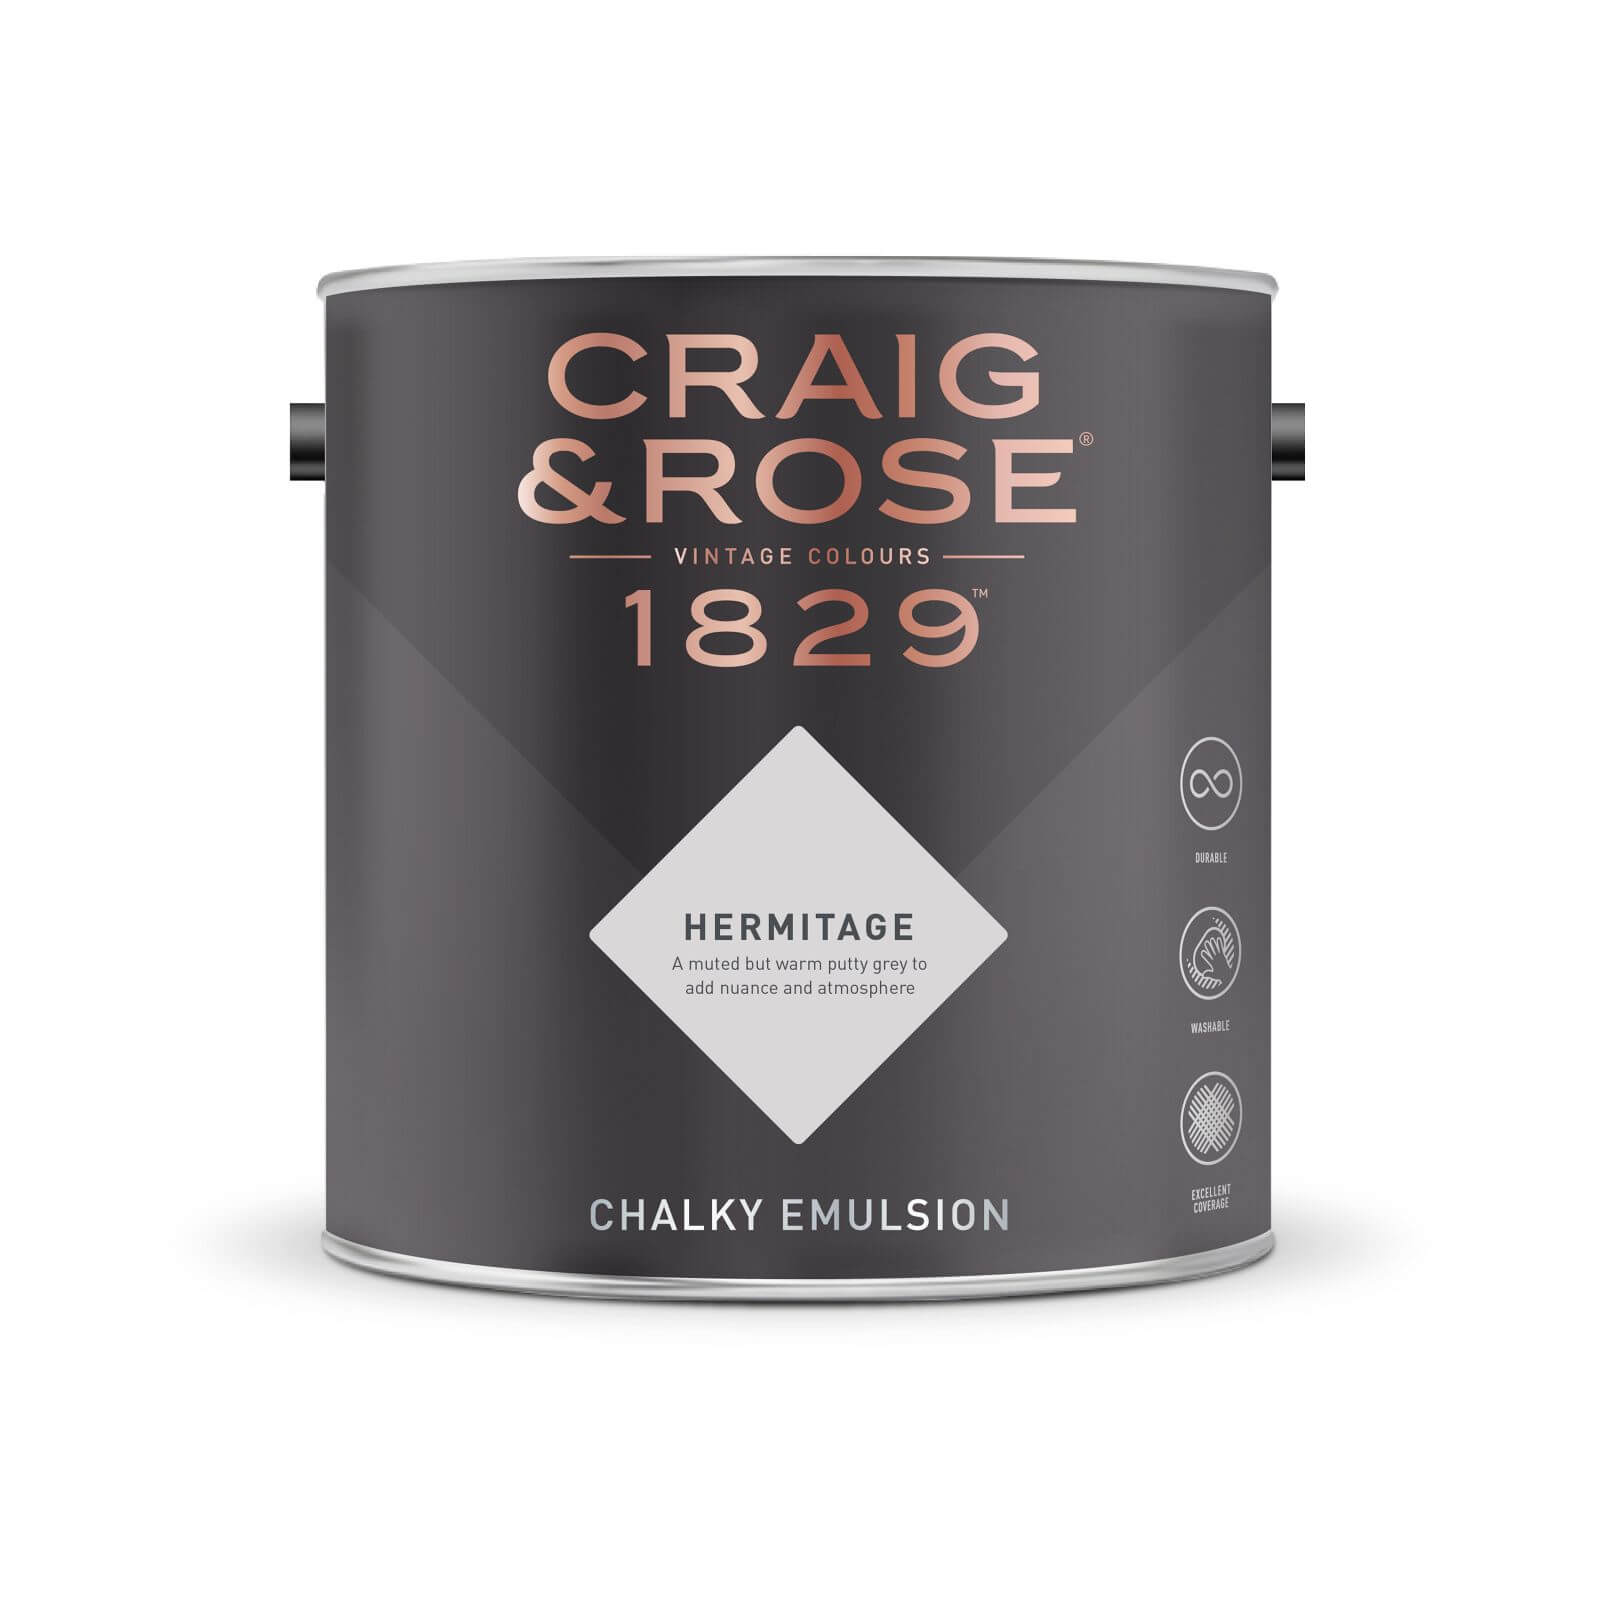 Craig & Rose 1829 Chalky Emulsion Paint Hermitage - Tester 50ml